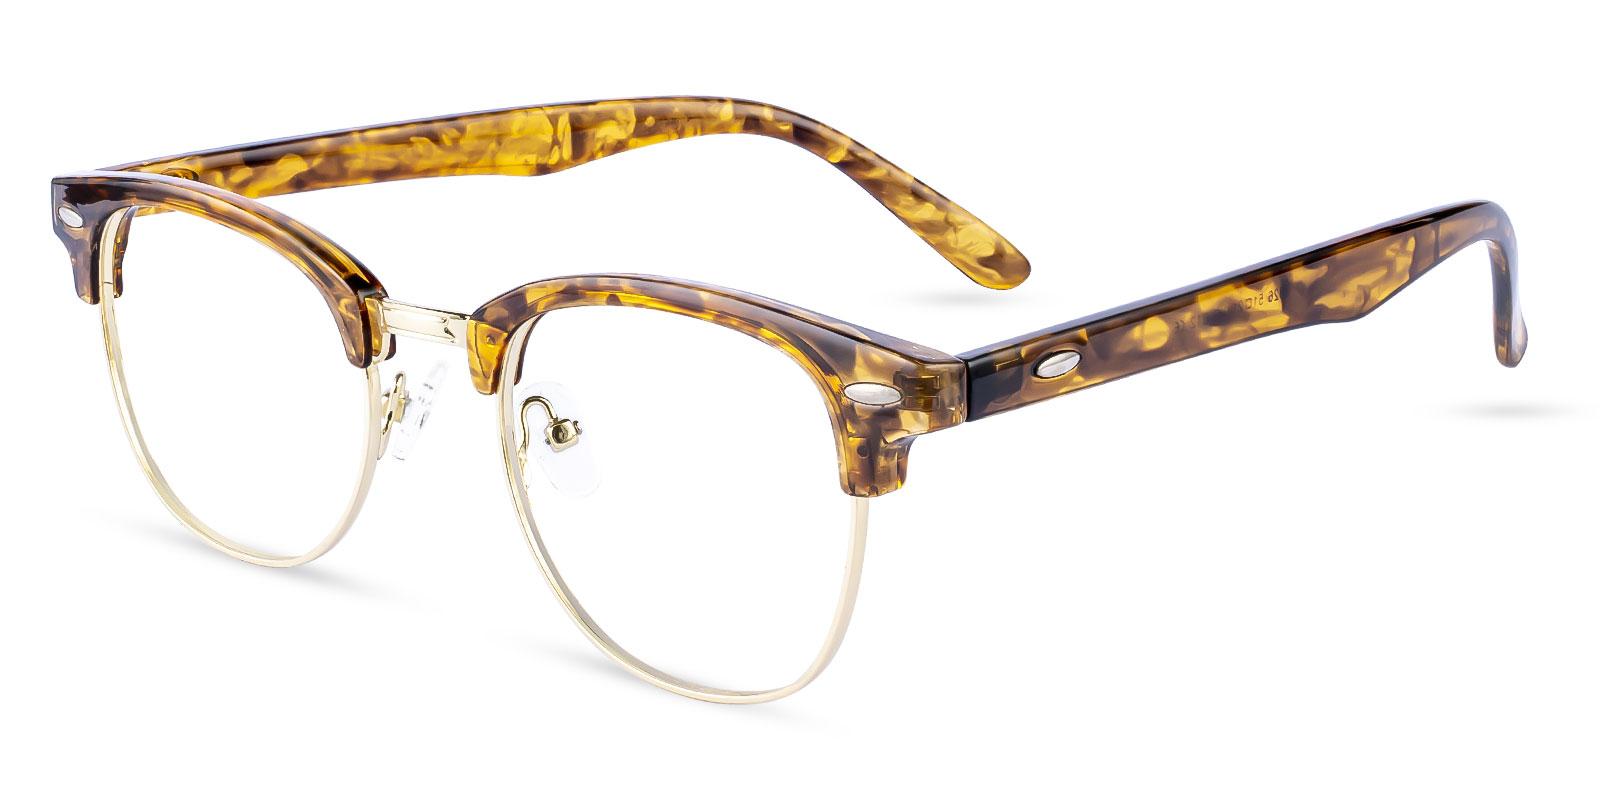 Greeley Gold Metal Eyeglasses , NosePads Frames from ABBE Glasses